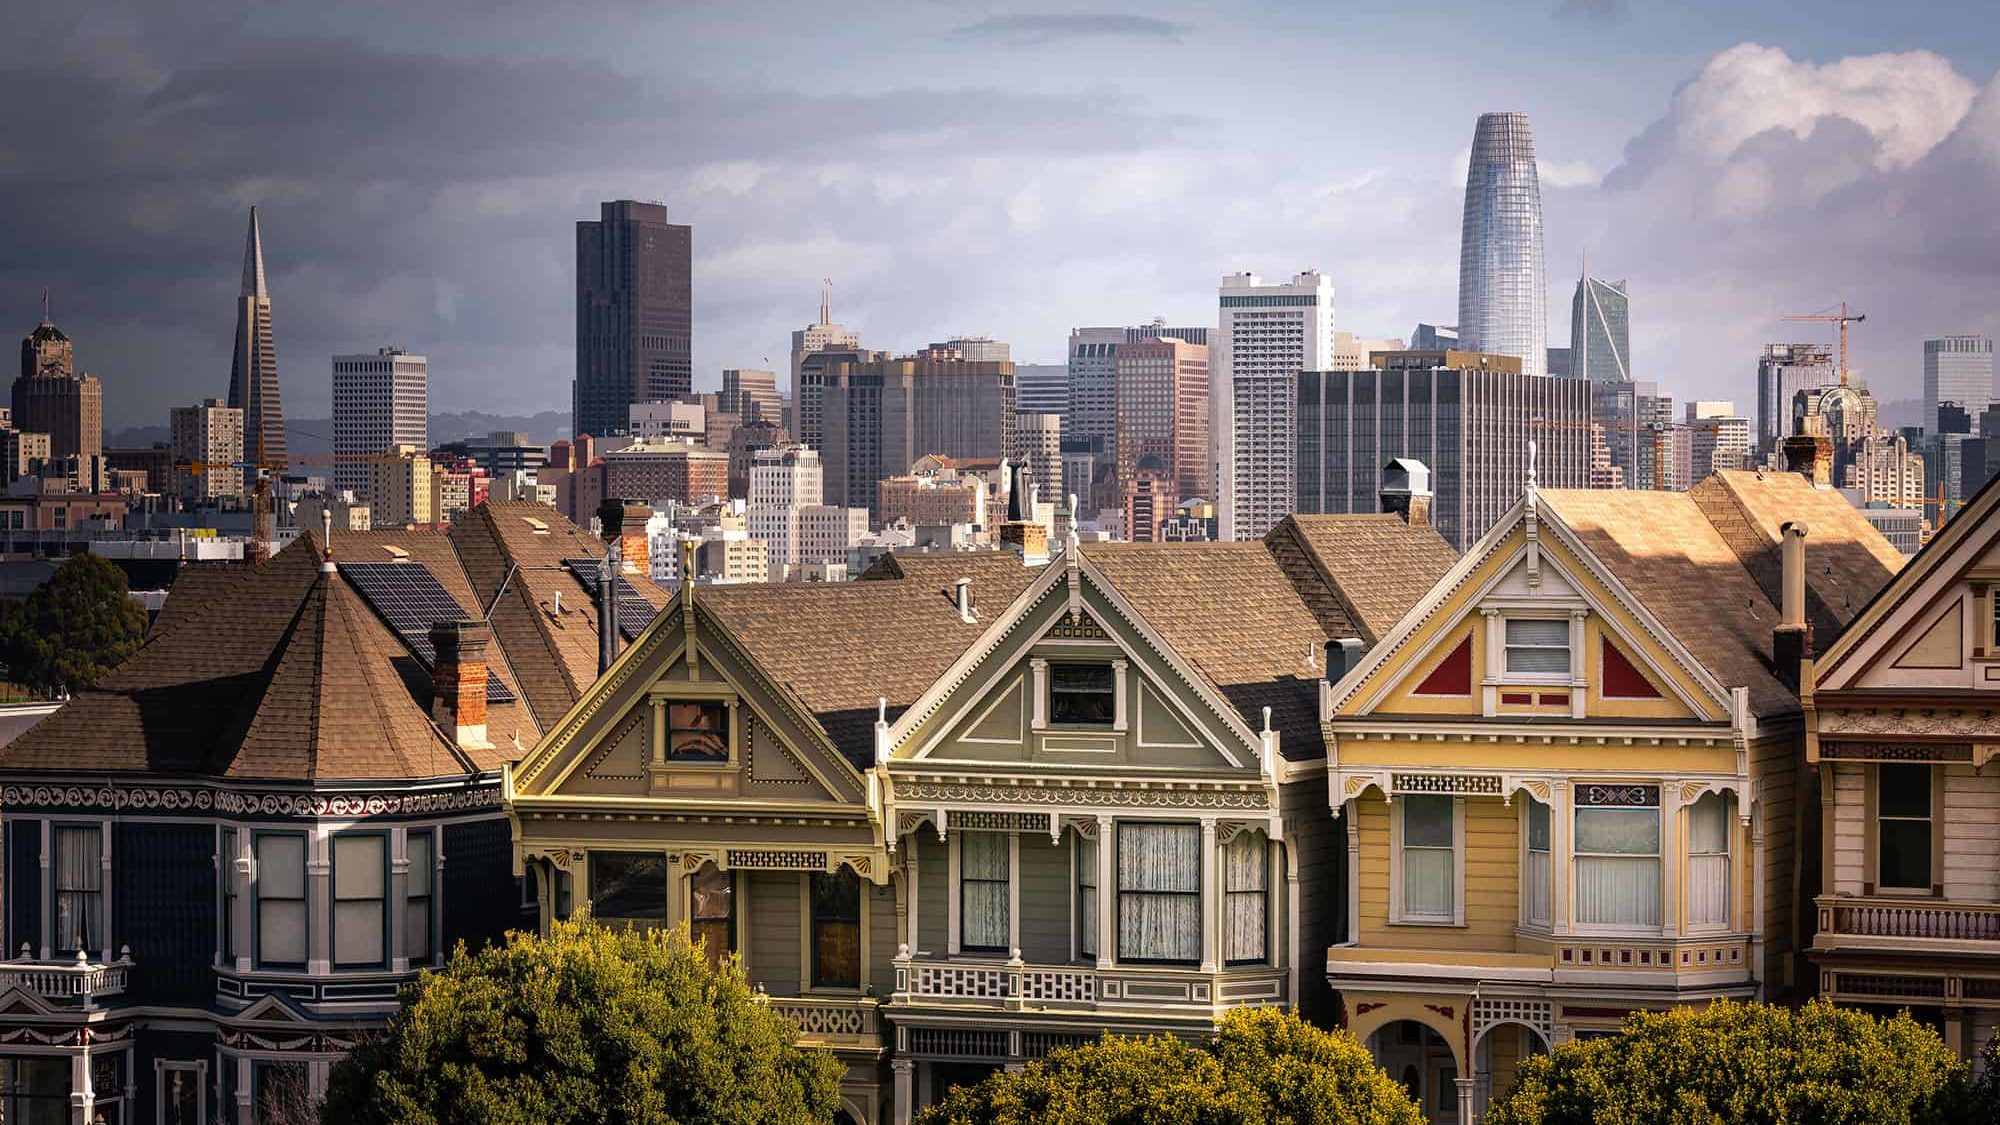 painted-ladies-houses-san-francisco-s-skyline-back-california-state-united-states